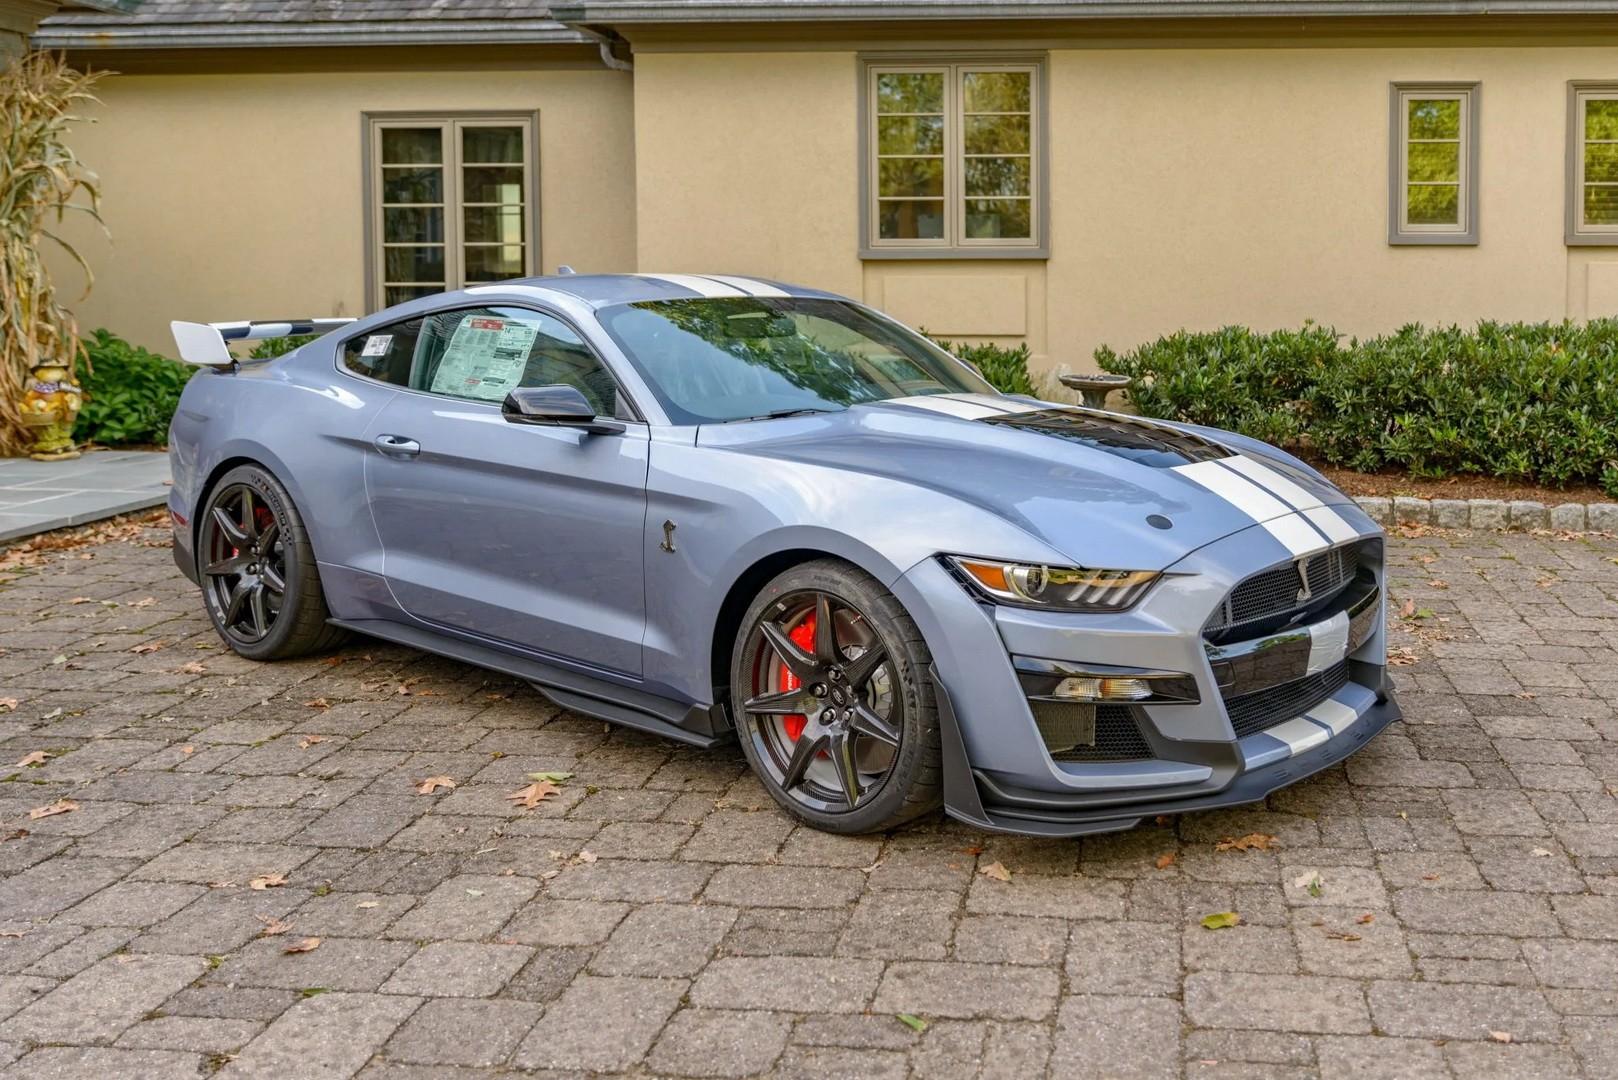 2022 mustang shelby gt500 heritage edition looks fancy wearing brittany blue metallic 2